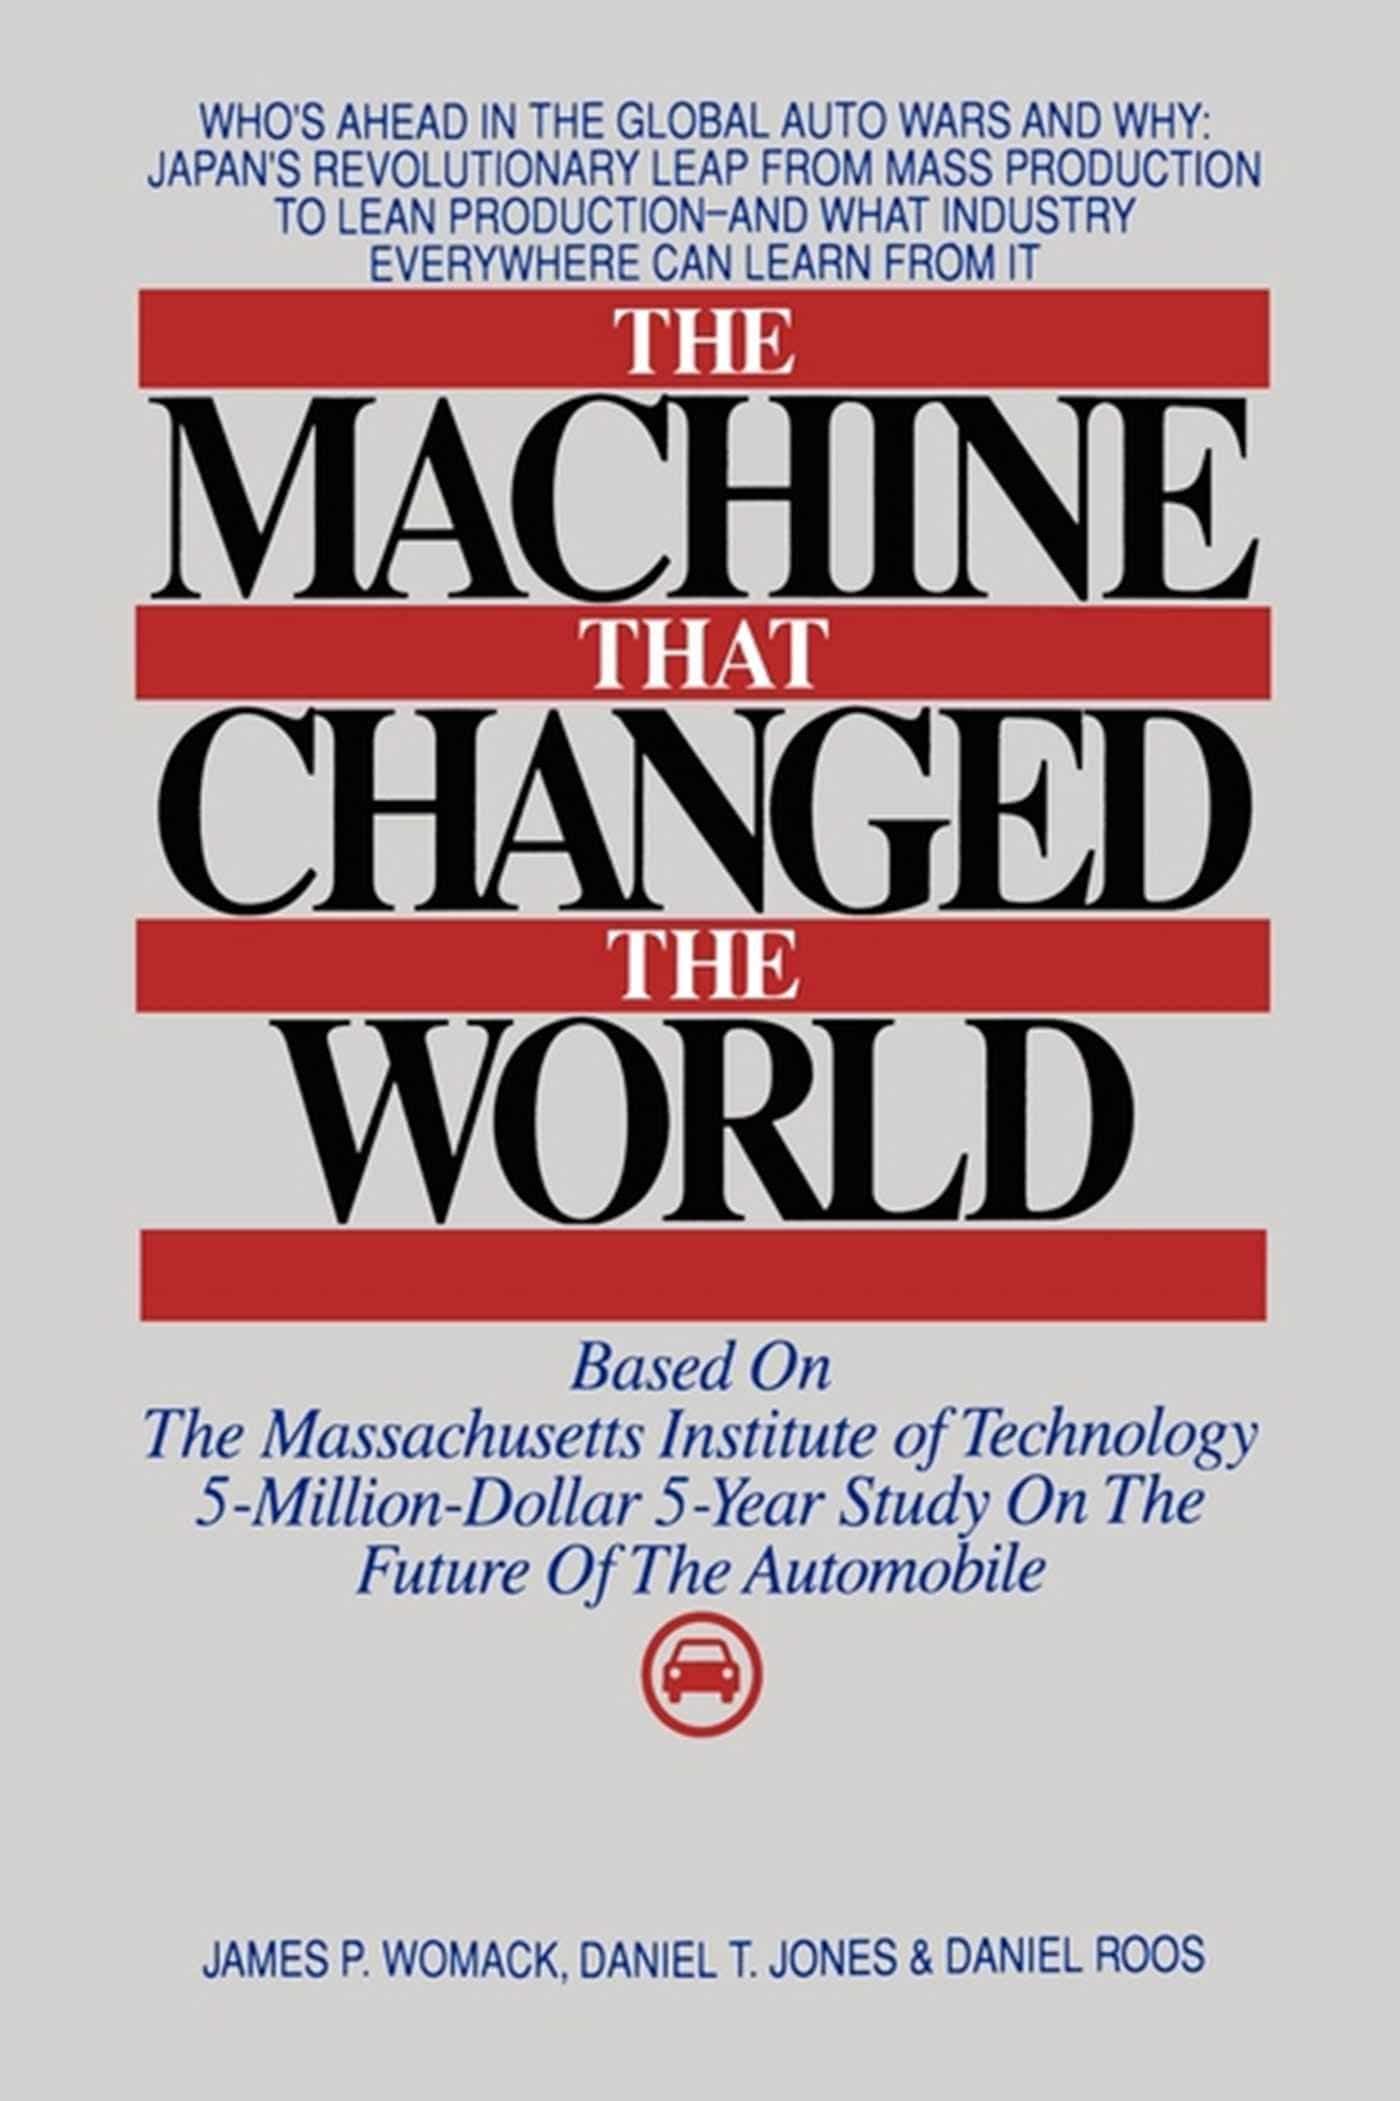 The cover of The Machine That Changed the World